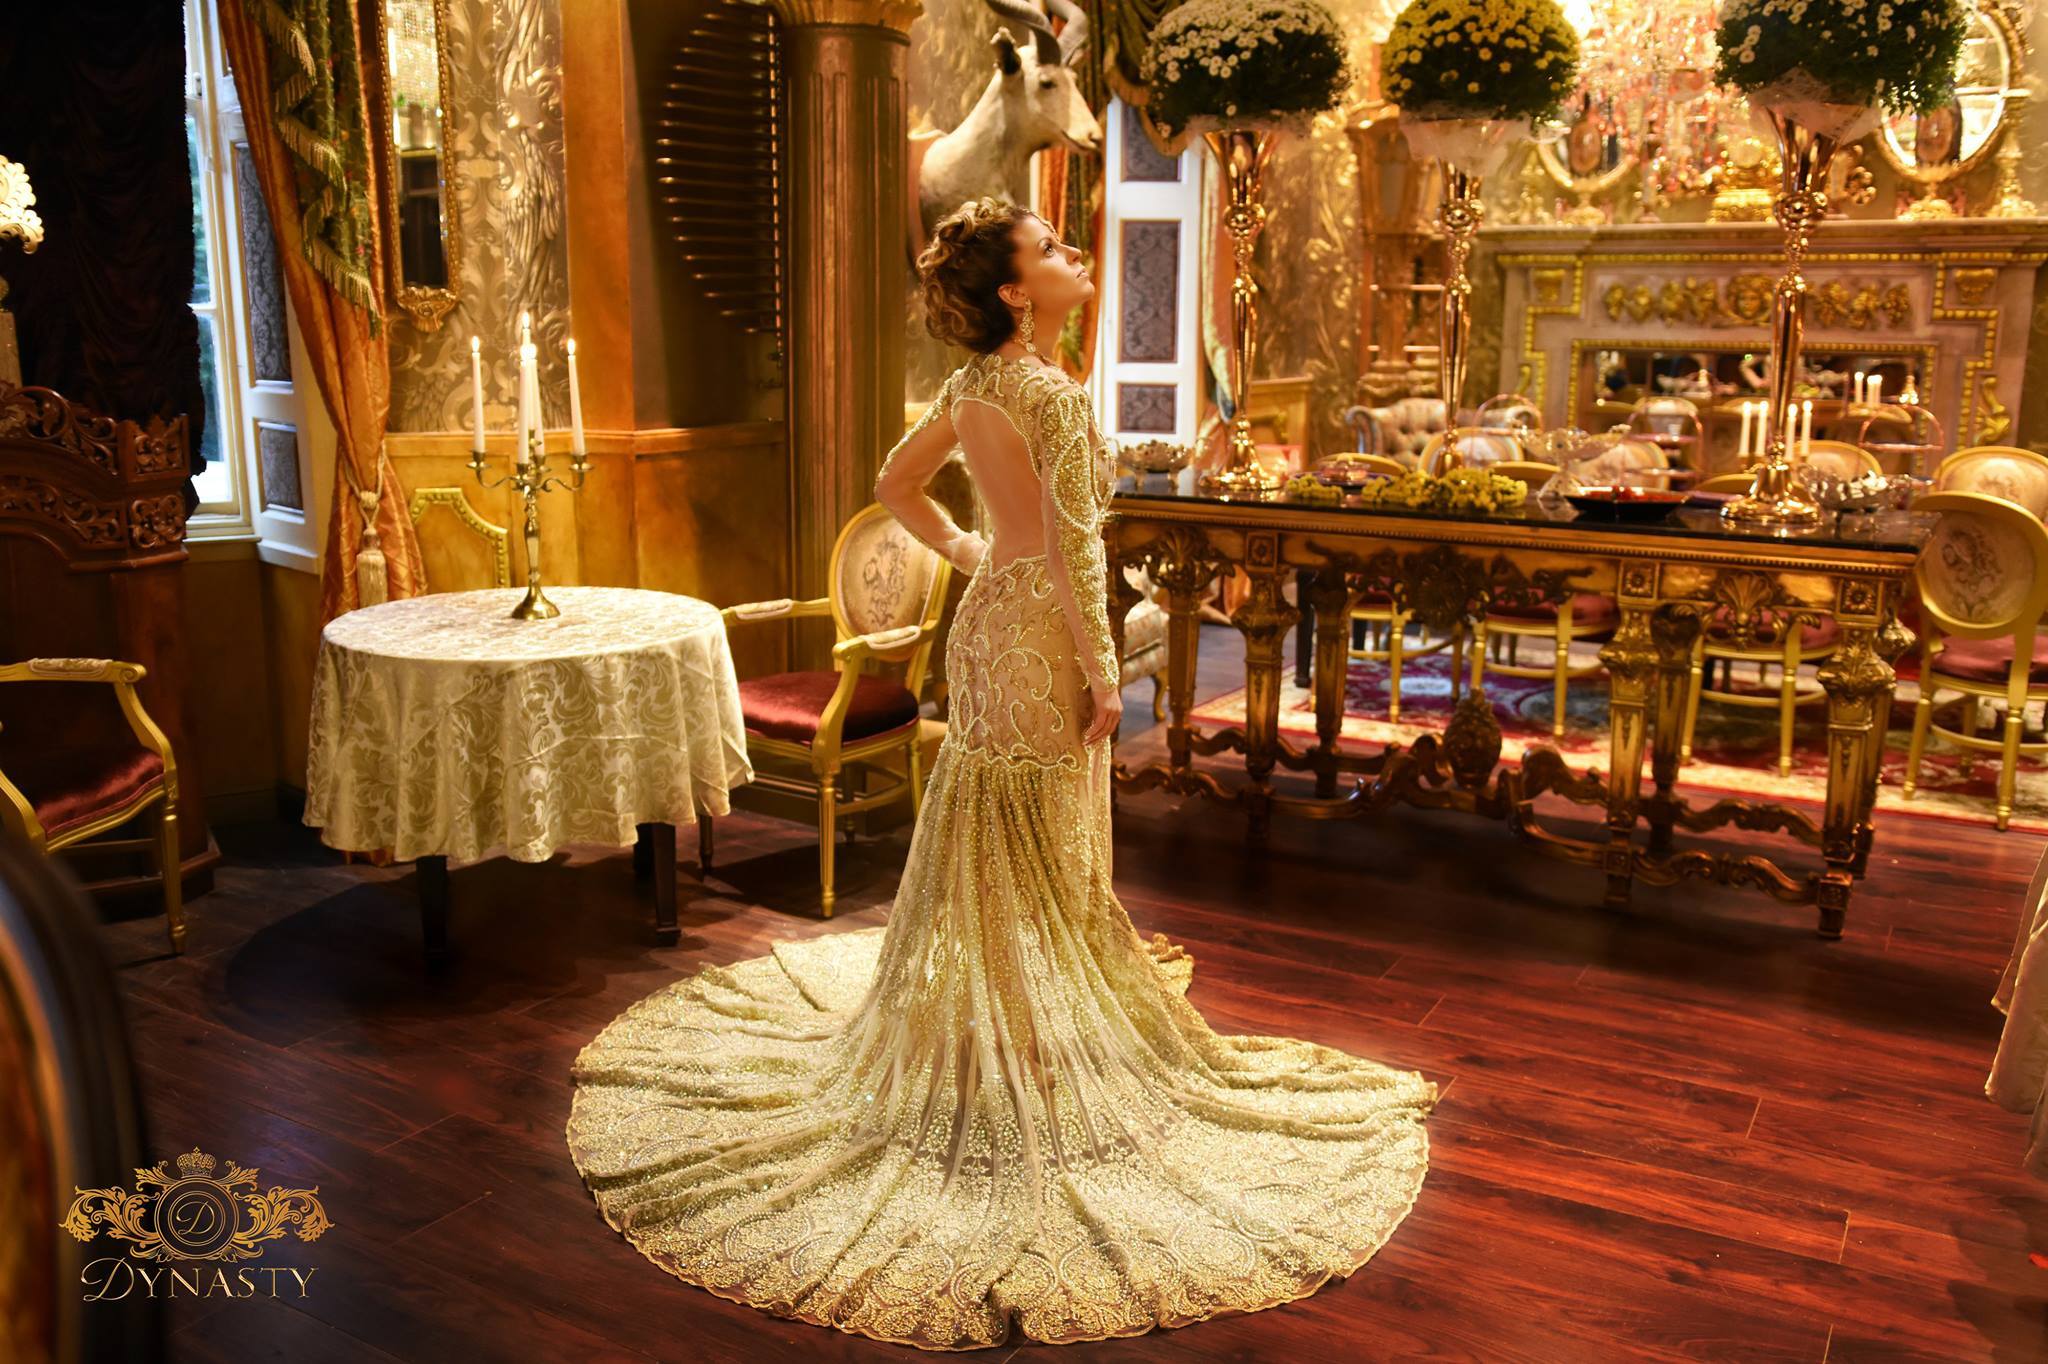 Dynasty's promotional photo shows a model admiring the opulent interior of the restaurant.